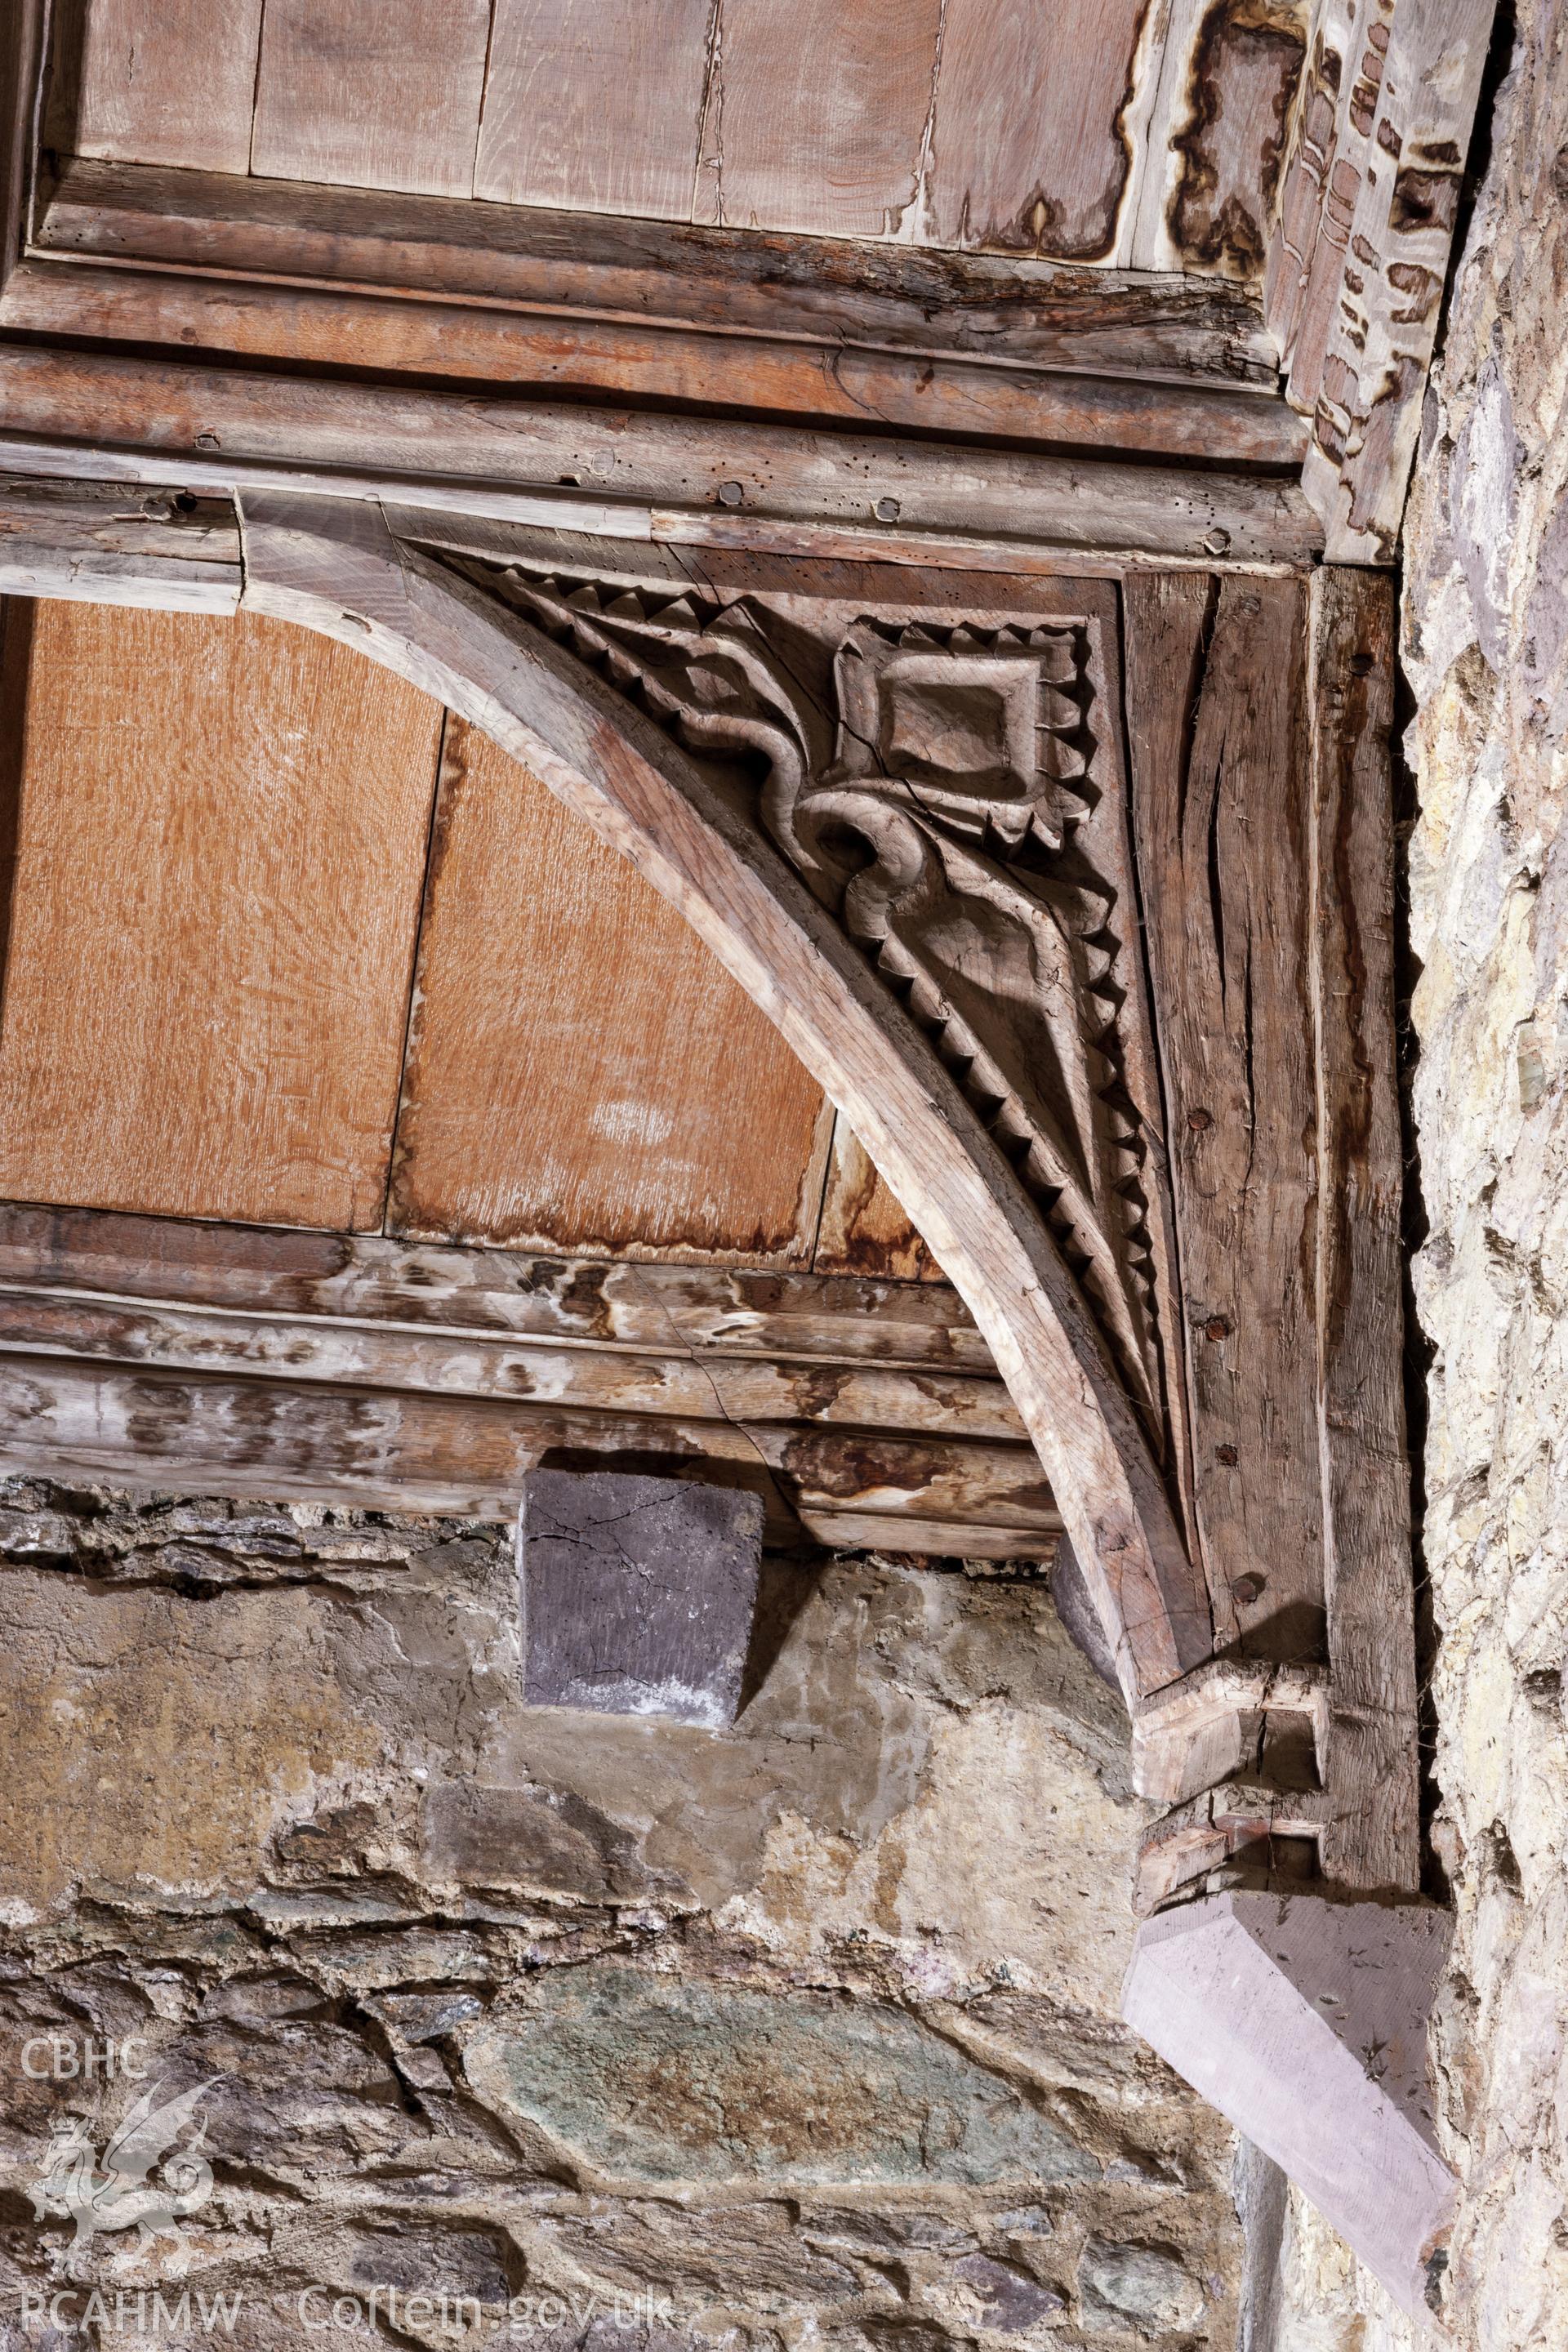 Spandrels in south aisle, north side